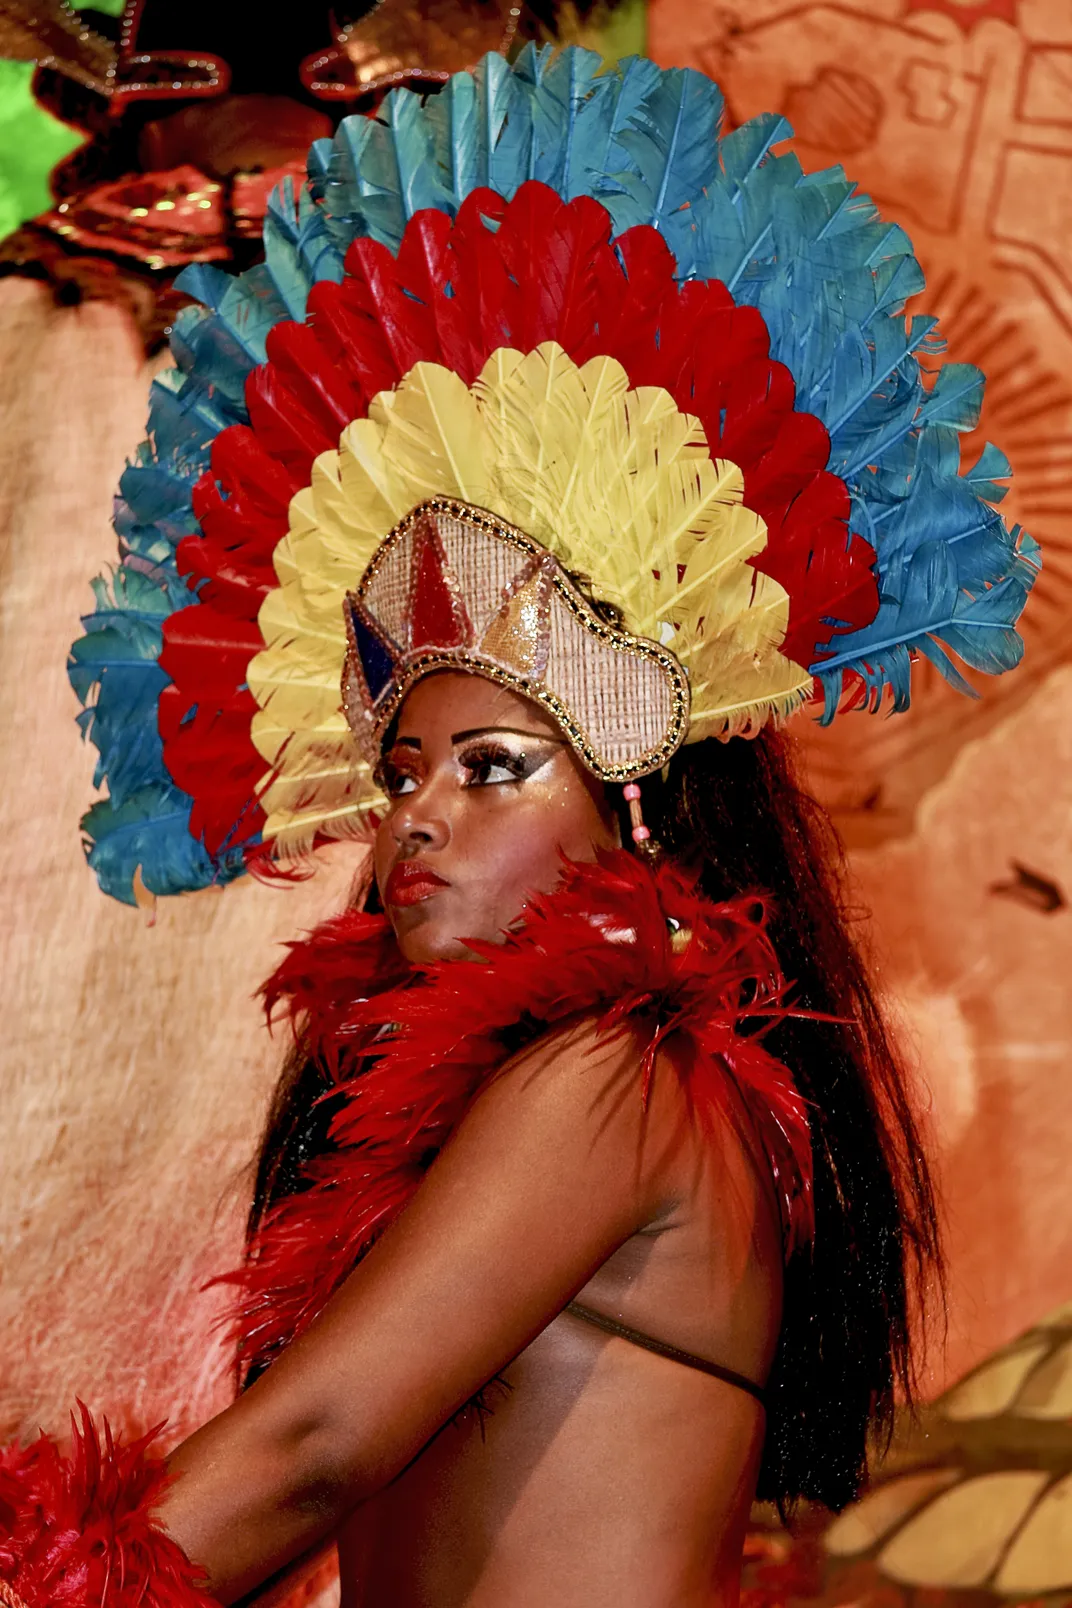 A woman wears a bright colorful headdress